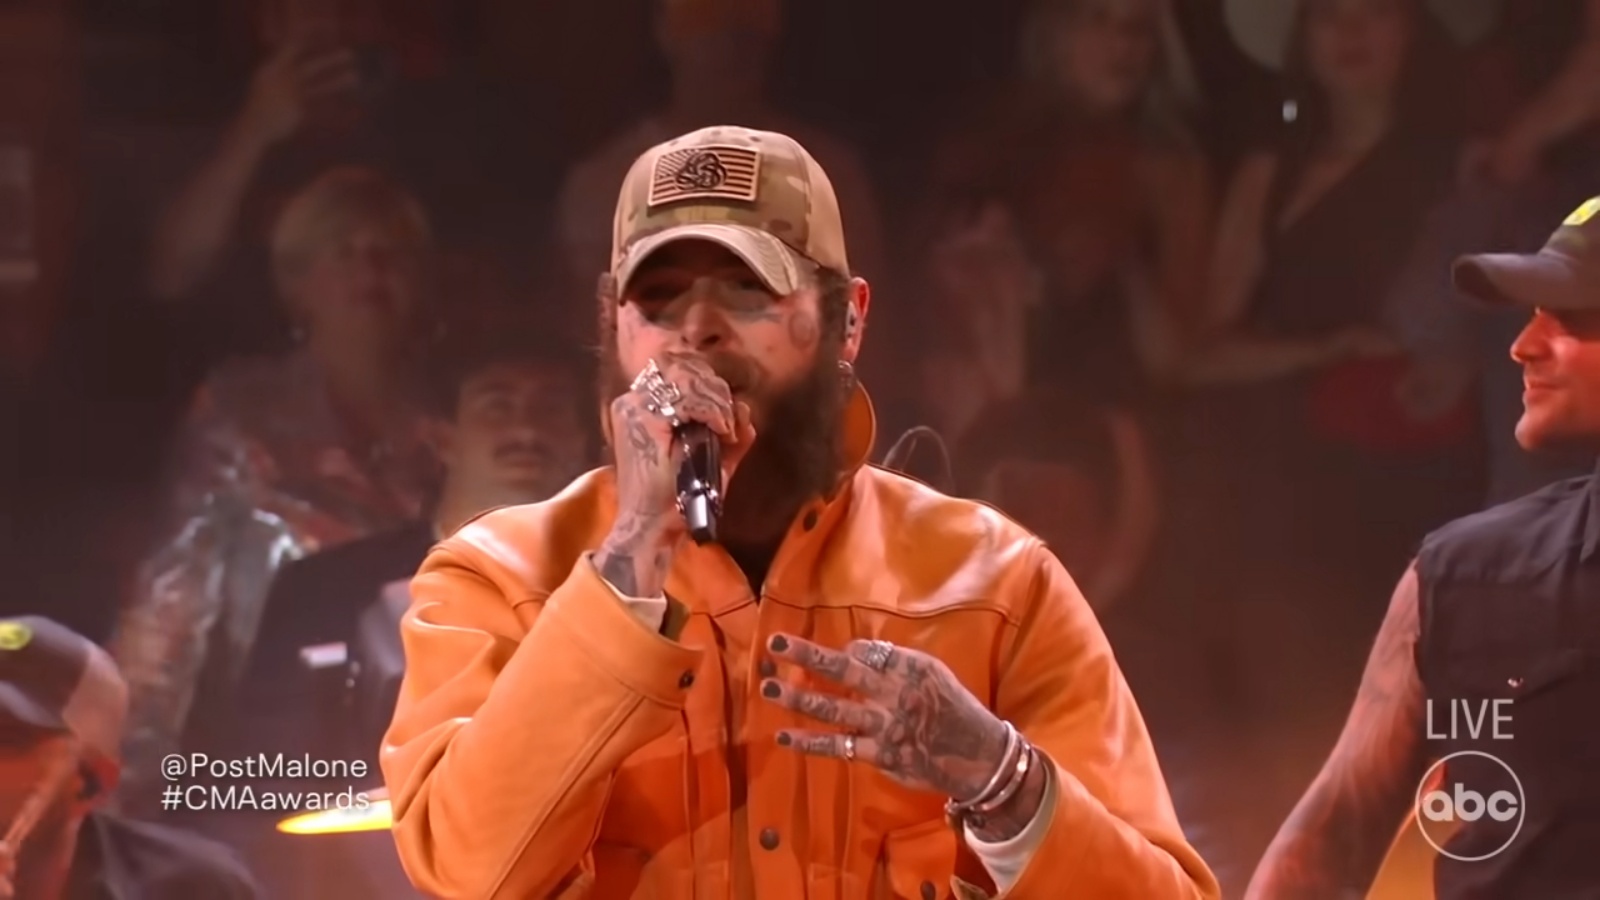 Post Malone fans call for country album after CMA Awards performance